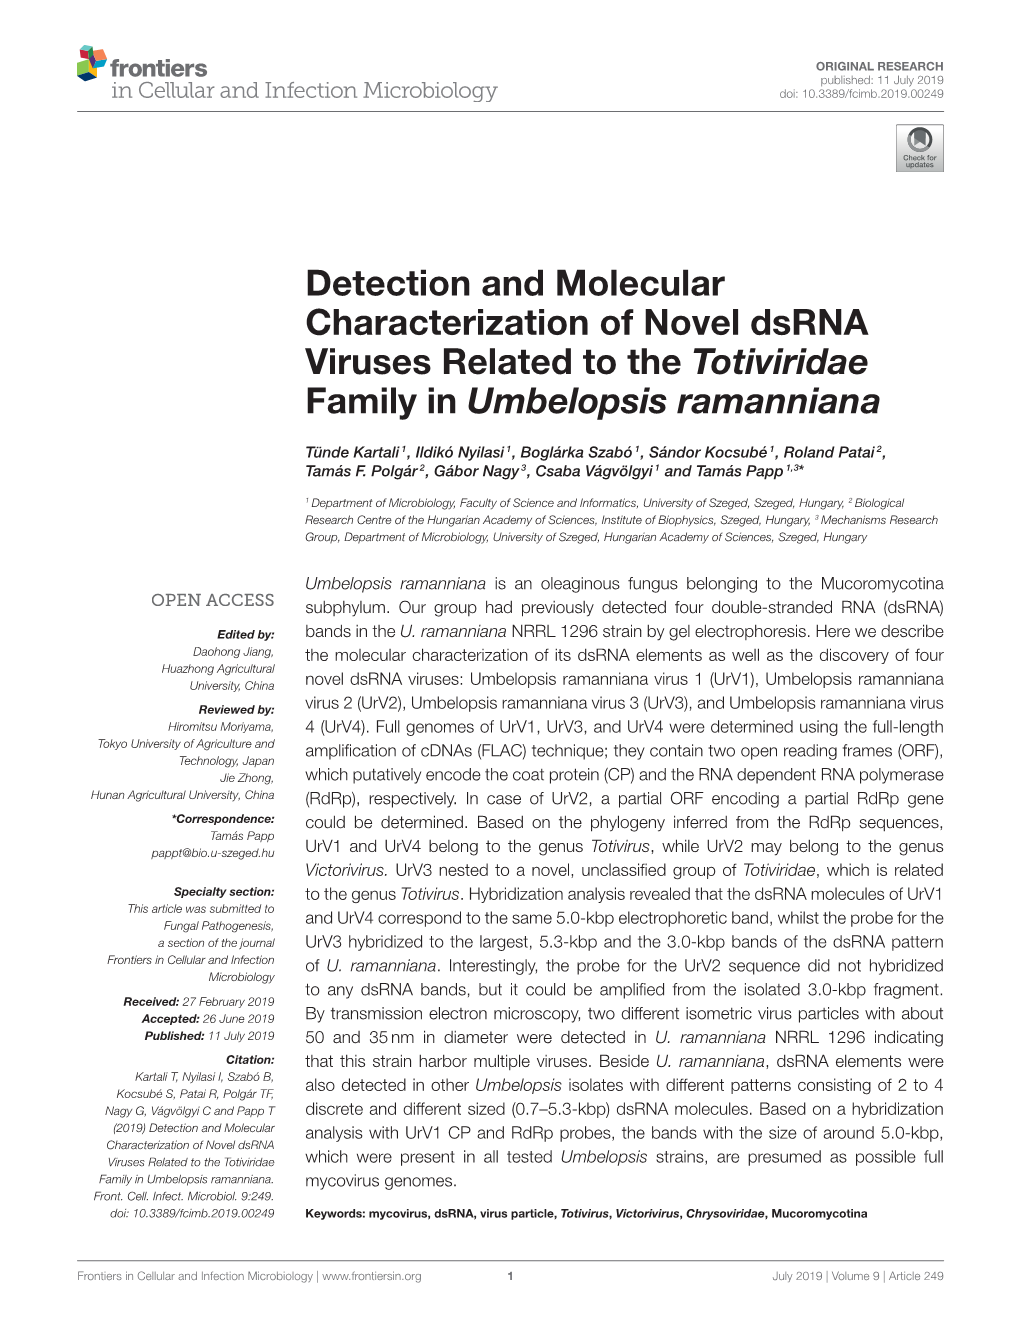 Detection and Molecular Characterization of Novel Dsrna Viruses Related to the Totiviridae Family in Umbelopsis Ramanniana